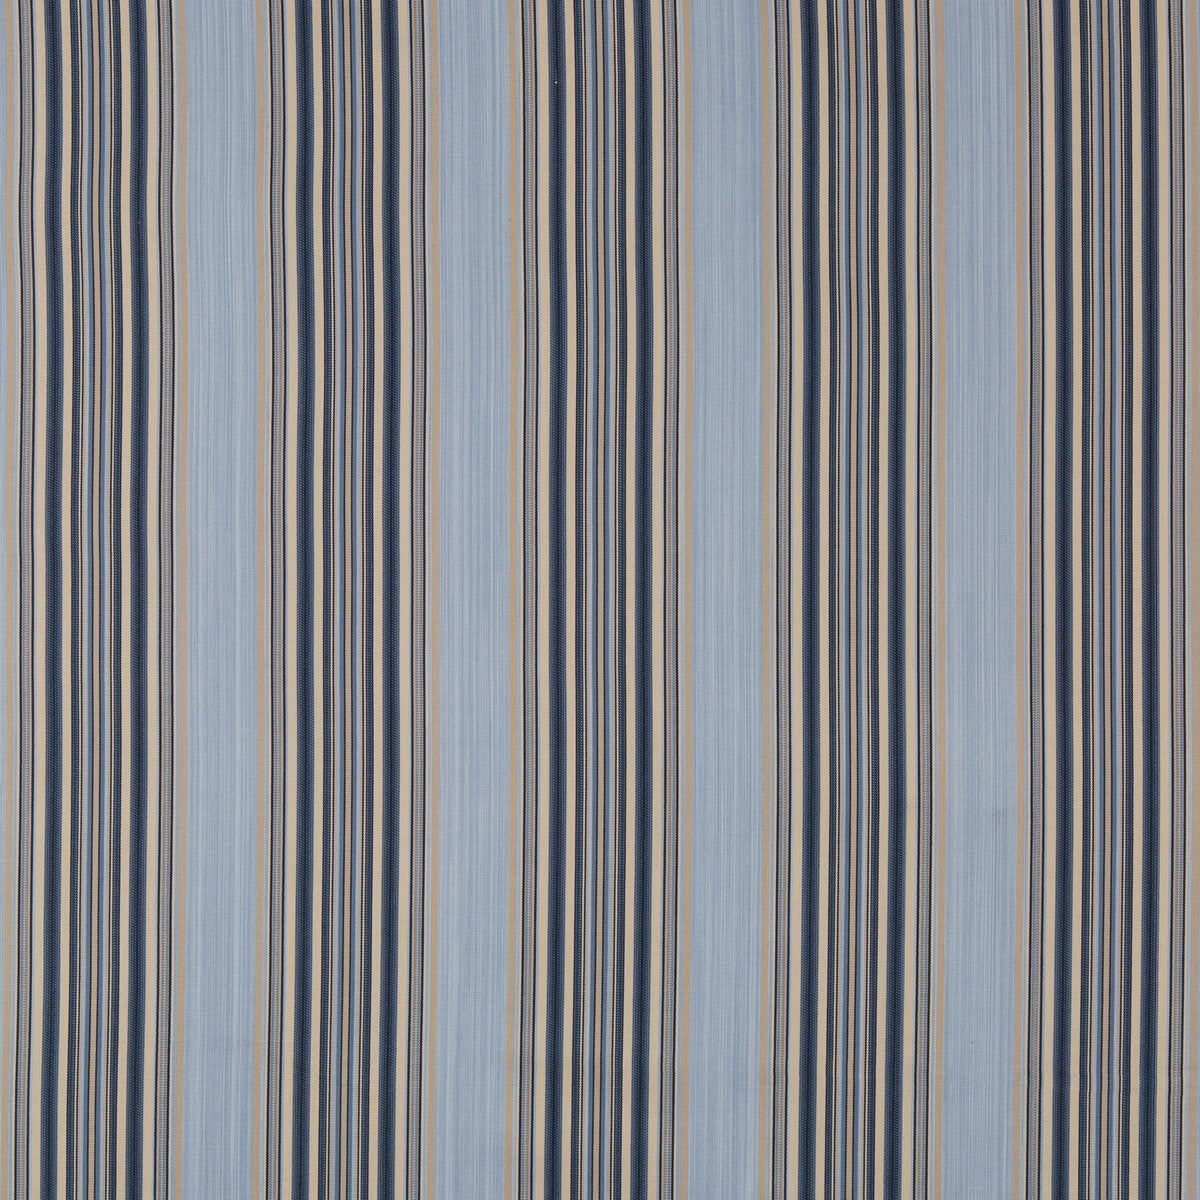 Vyne Stripe fabric in capri color - pattern 2019103.155.0 - by Lee Jofa in the Manor House collection